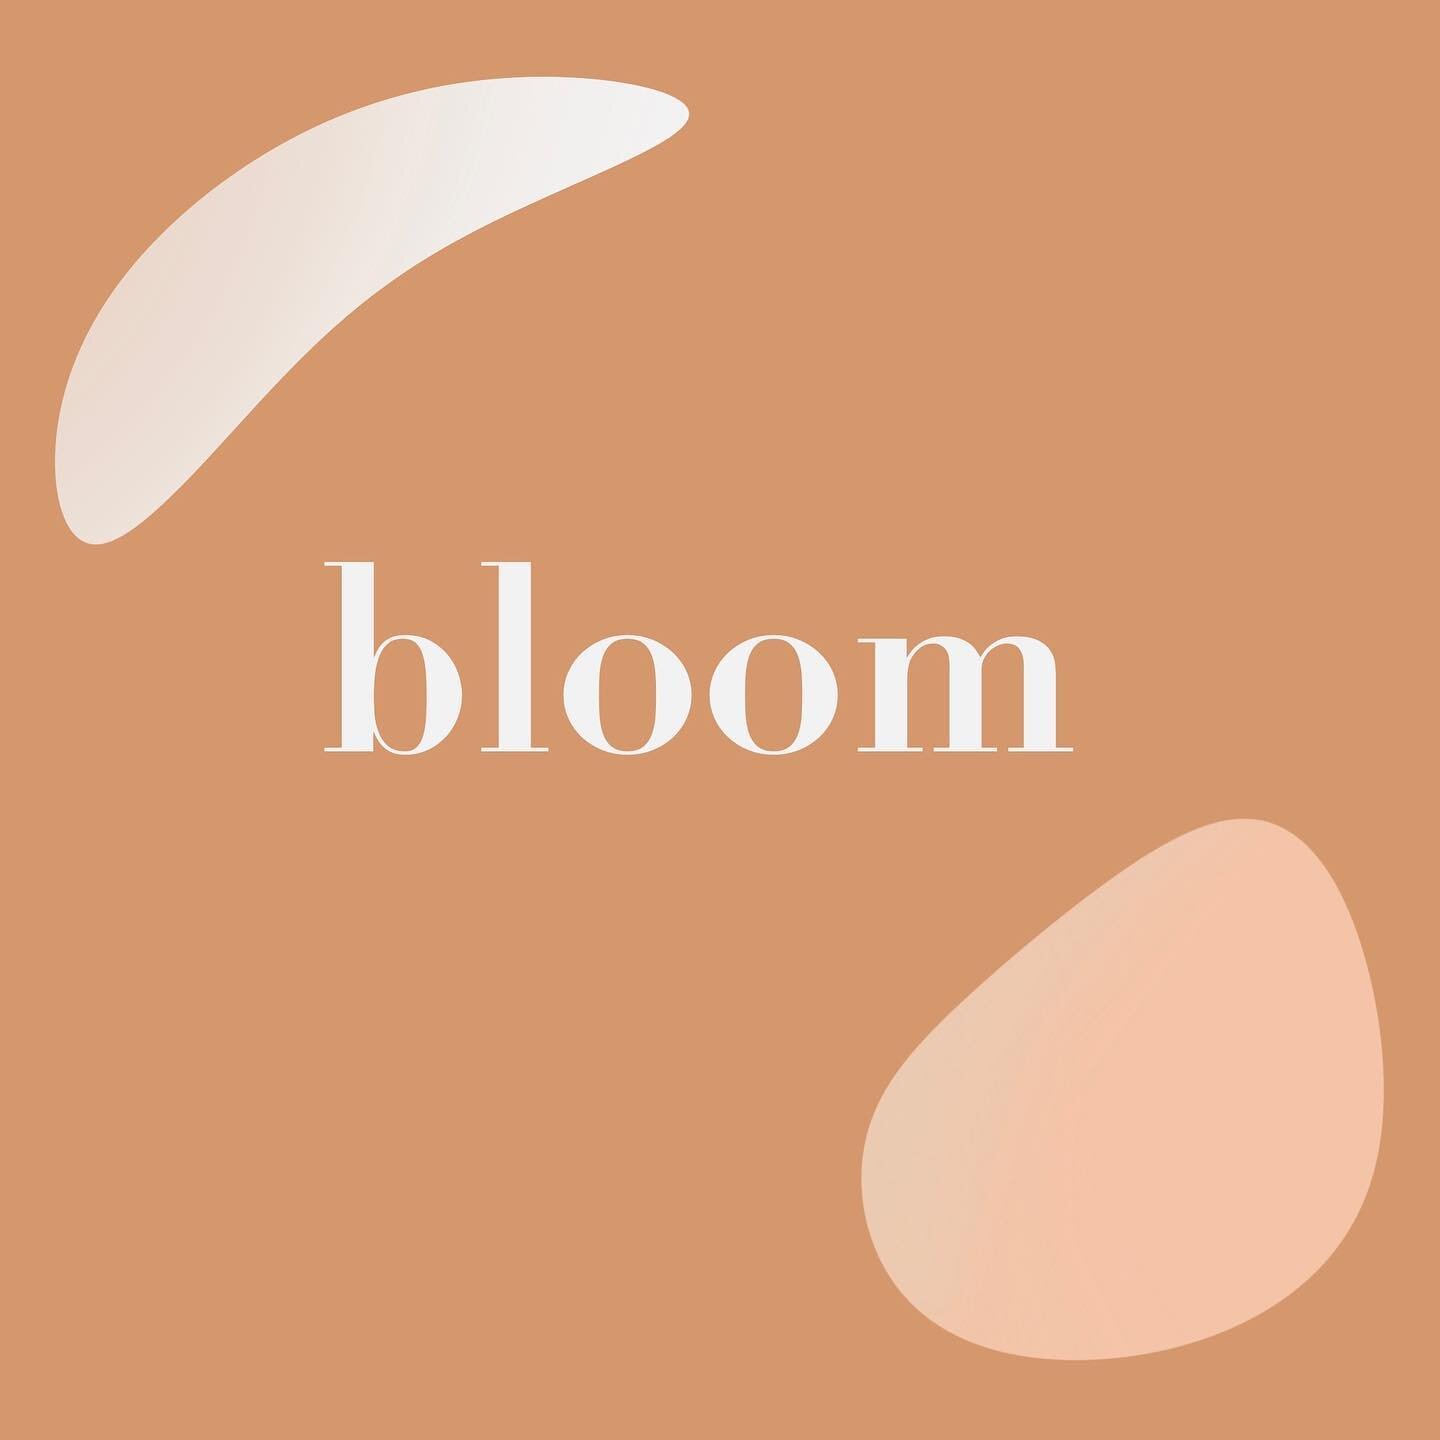 Inspired by: Bloom⁠⁠
The magnolia tree in the courtyard next door to our apartment is growing buds right now, and every day they're bigger. I love the coziness of winter even though I'm definitely affected by lack of sunlight, but seeing things start